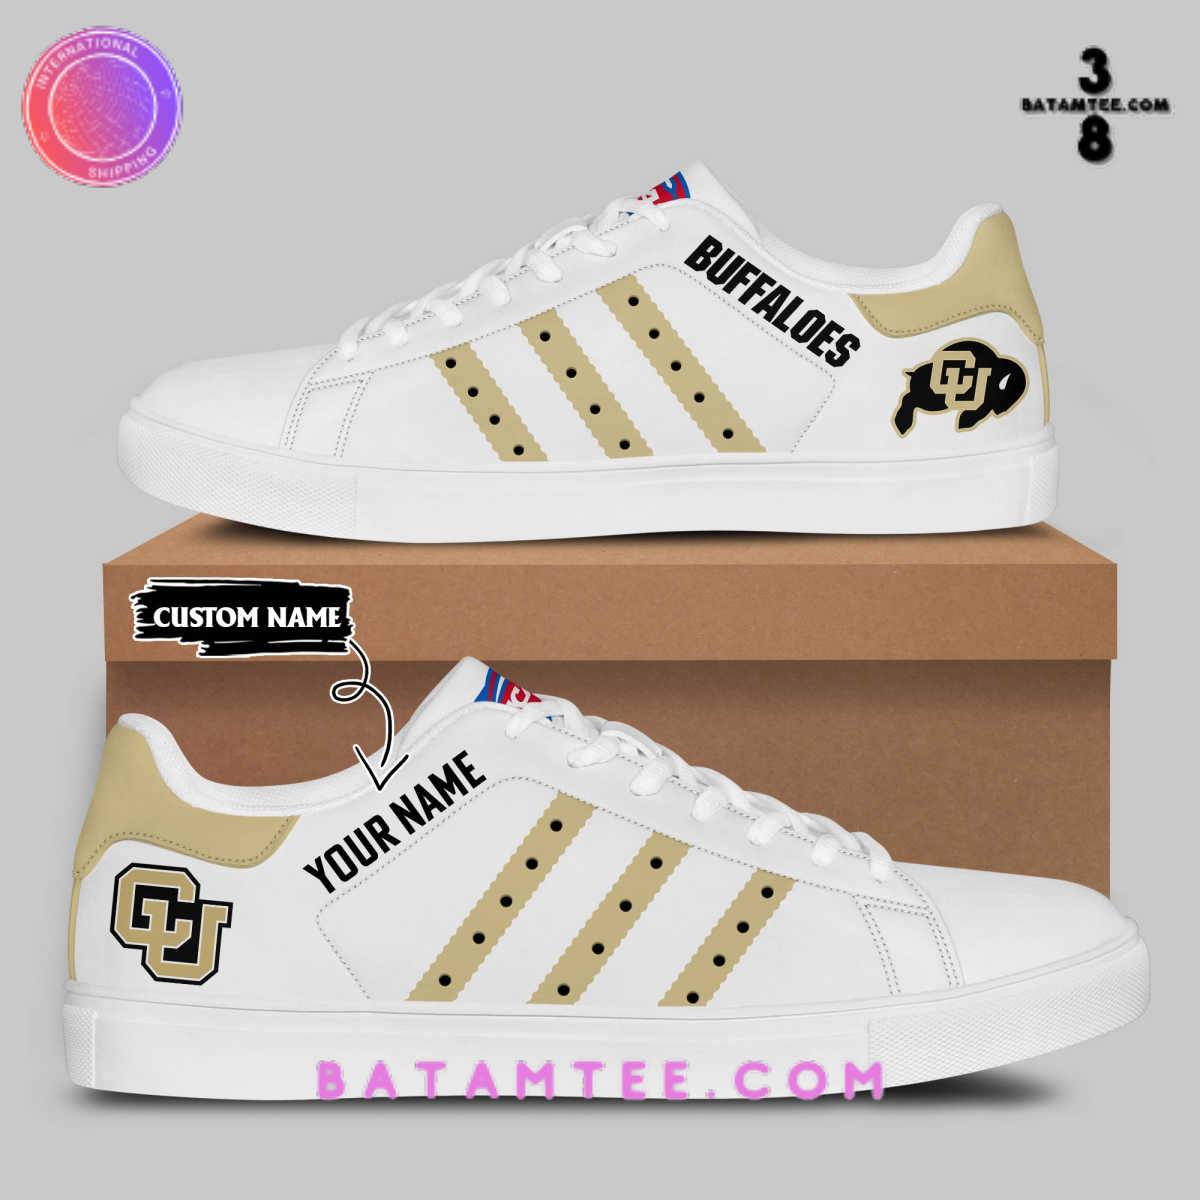 Colorado Buffaloes Football NCAA White Personalized Stan Smith Shoes's Overview - Batamtee Shop - Threads & Totes: Your Style Destination